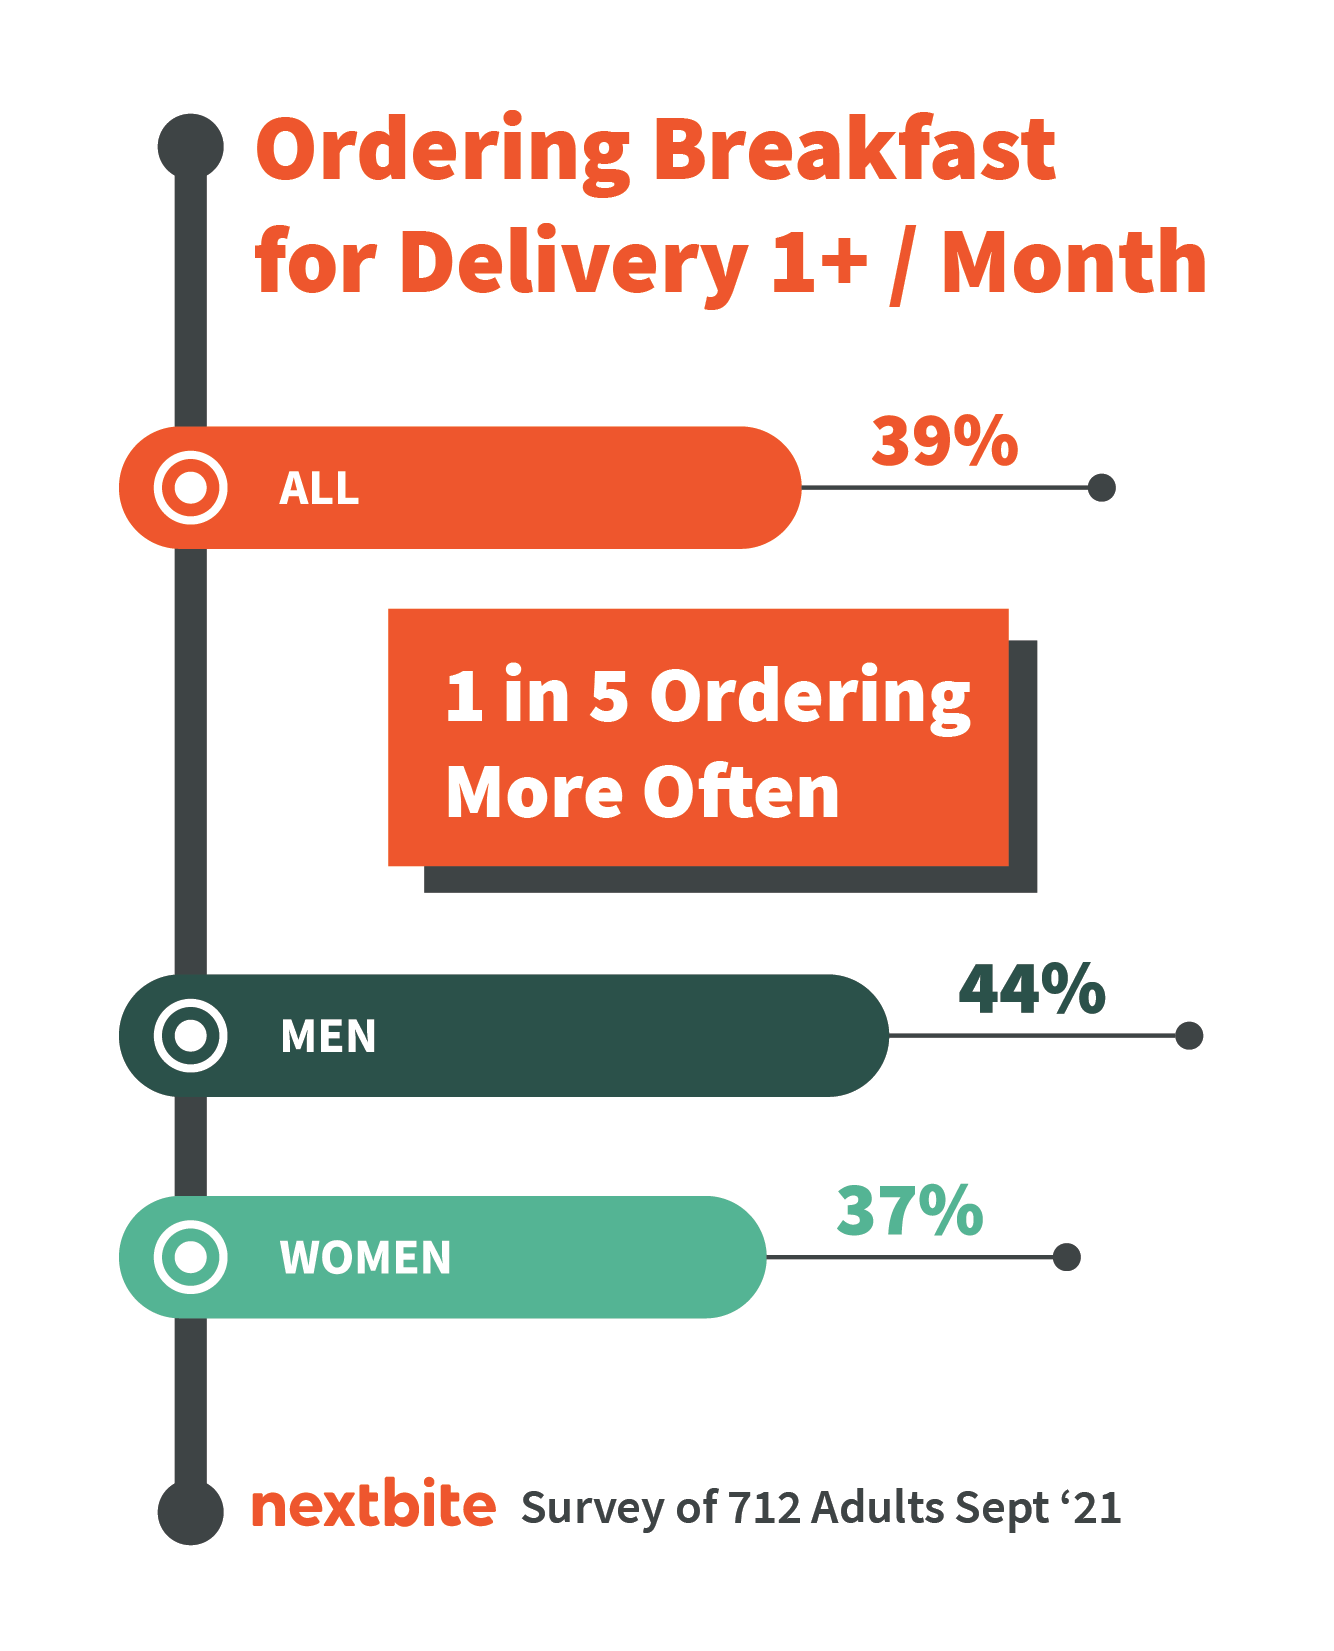 National Breakfast Day Survey Reports that 39% of Consumers Order Breakfast for Delivery at Last Once a Month